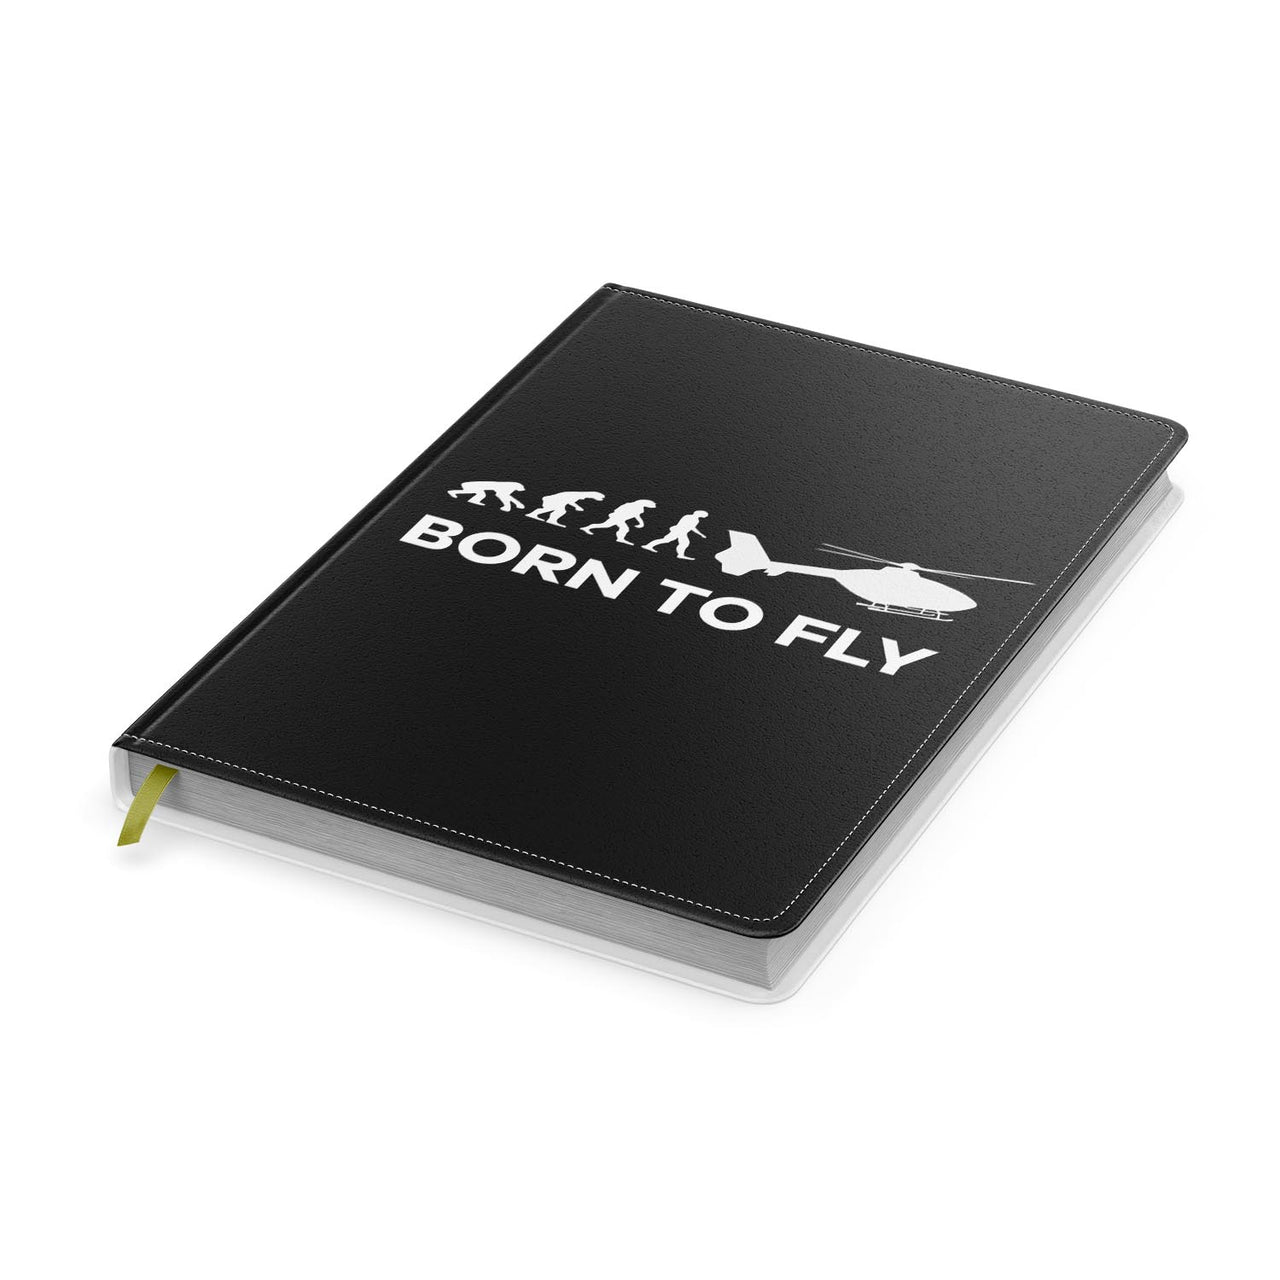 Born To Fly Helicopter Designed Notebooks